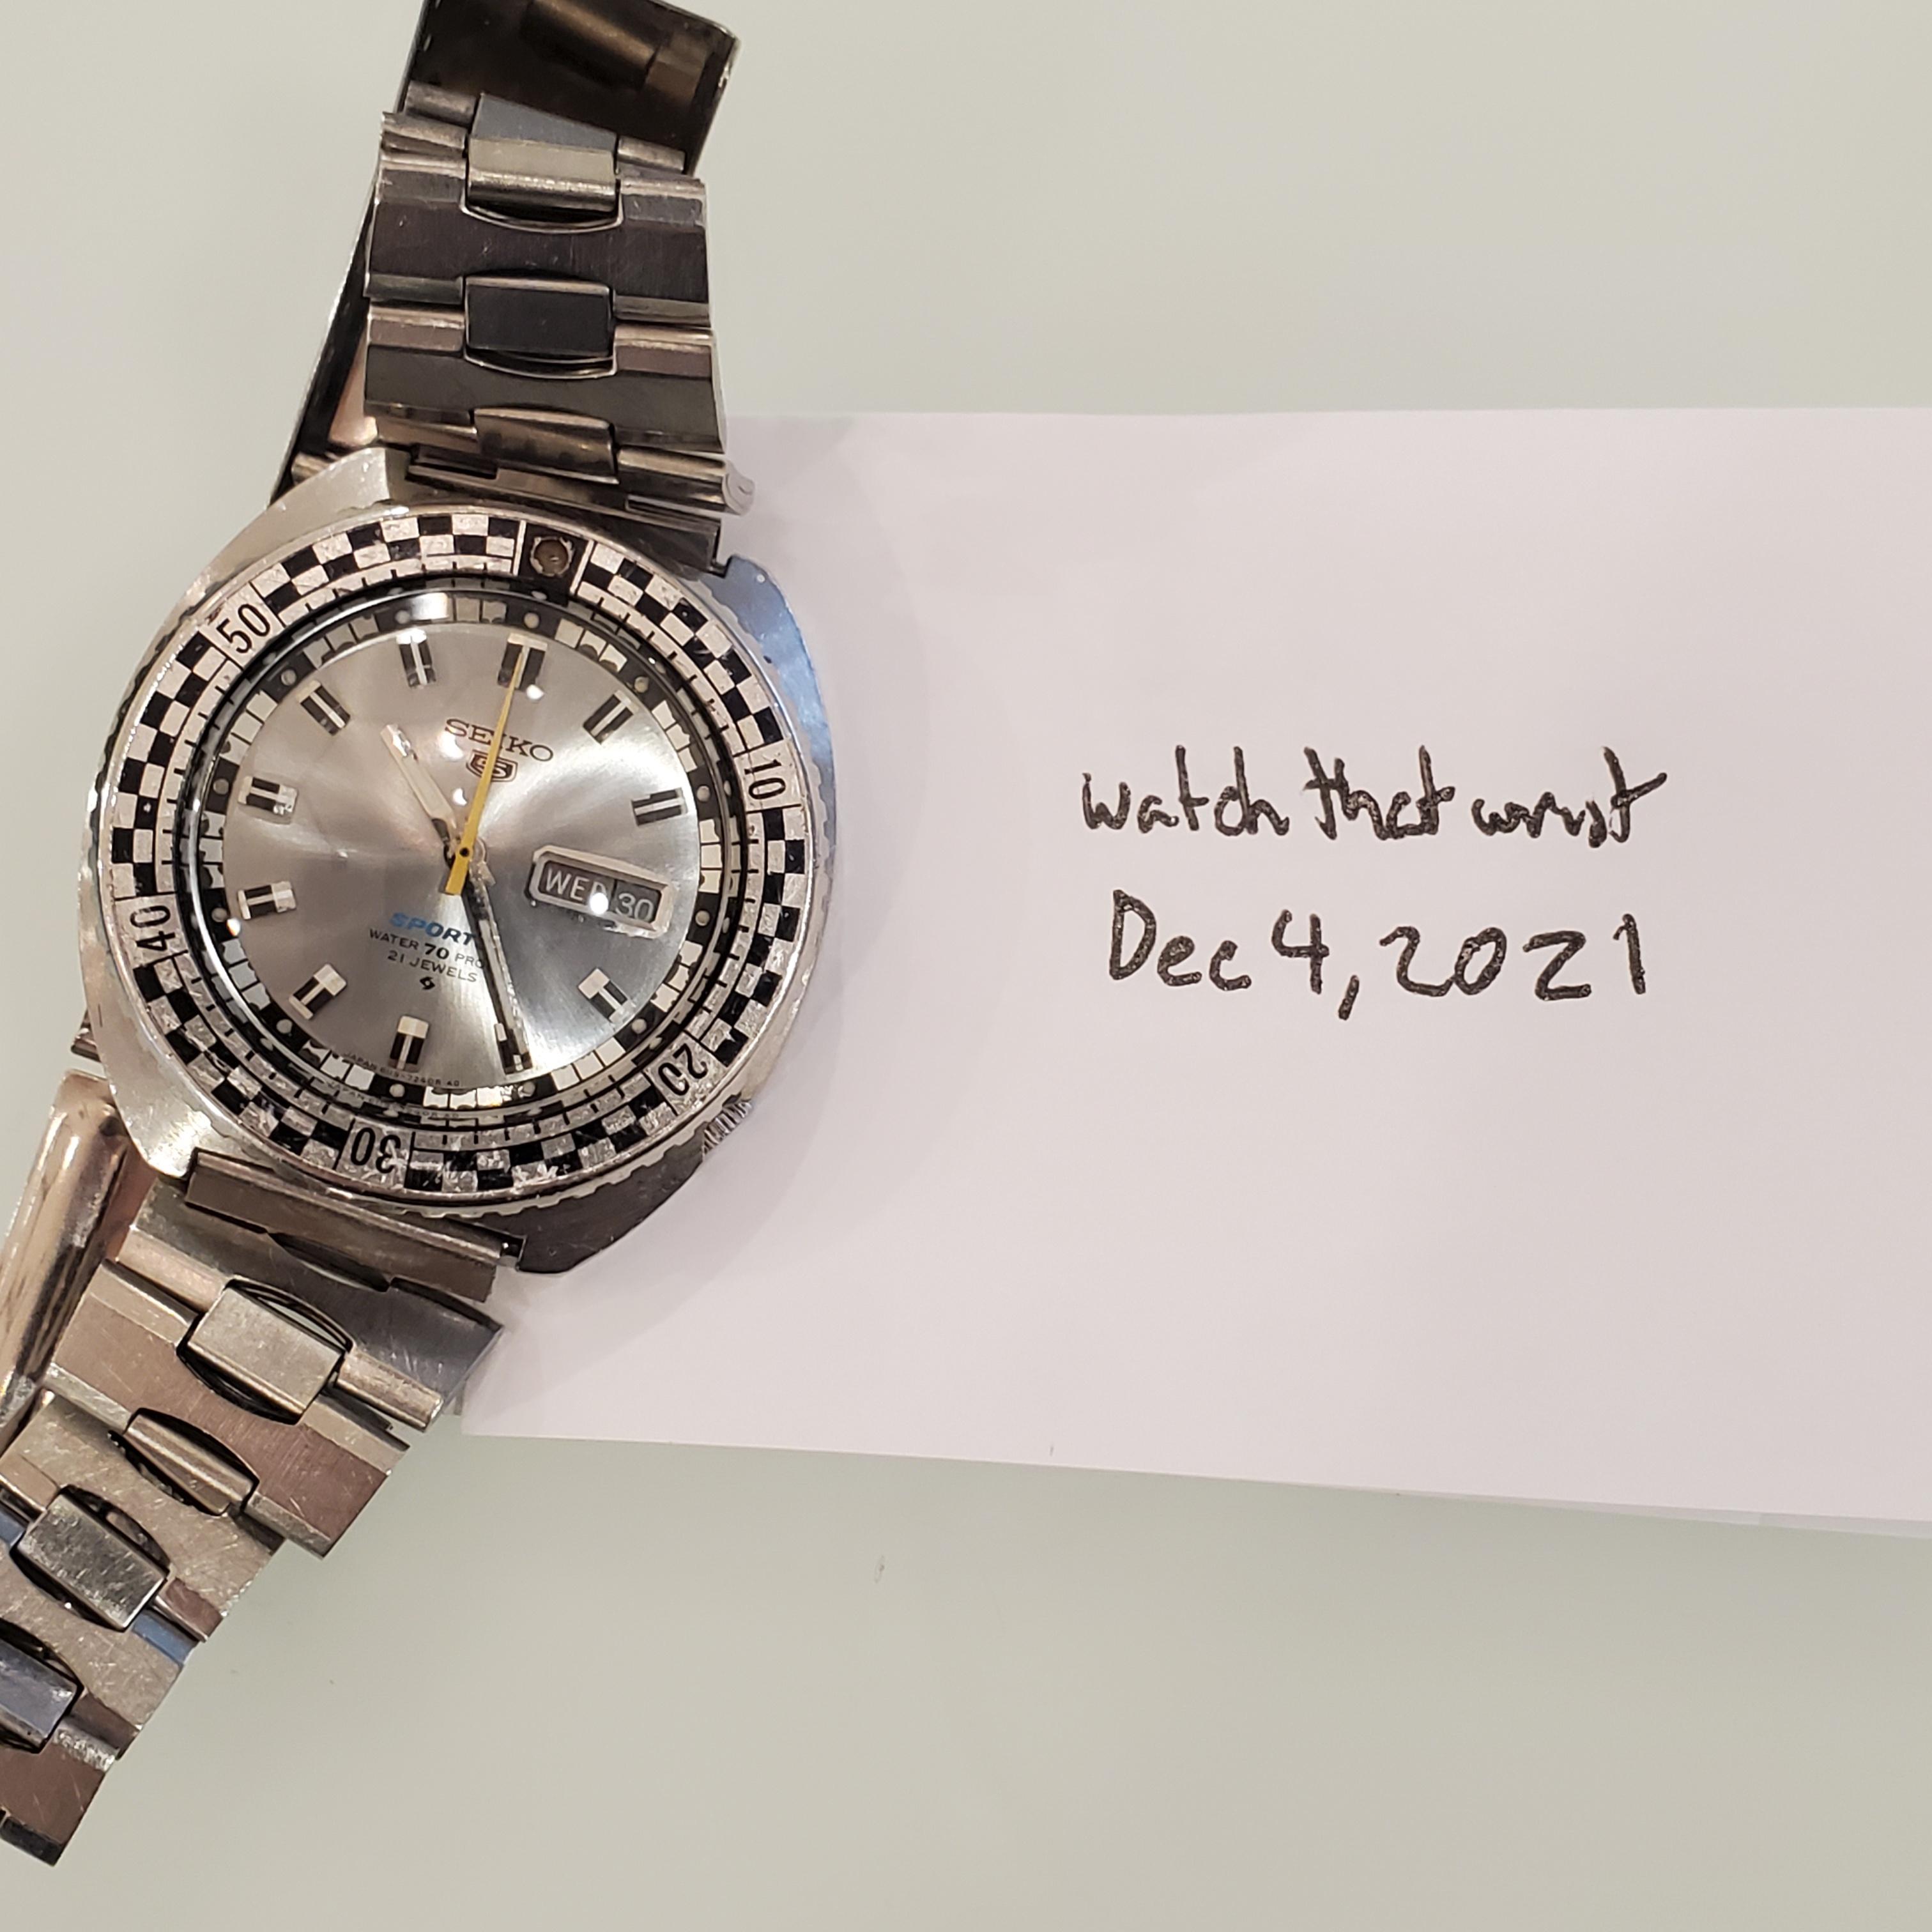 WTS] Seiko Rally Diver 6119-7170 | WatchCharts